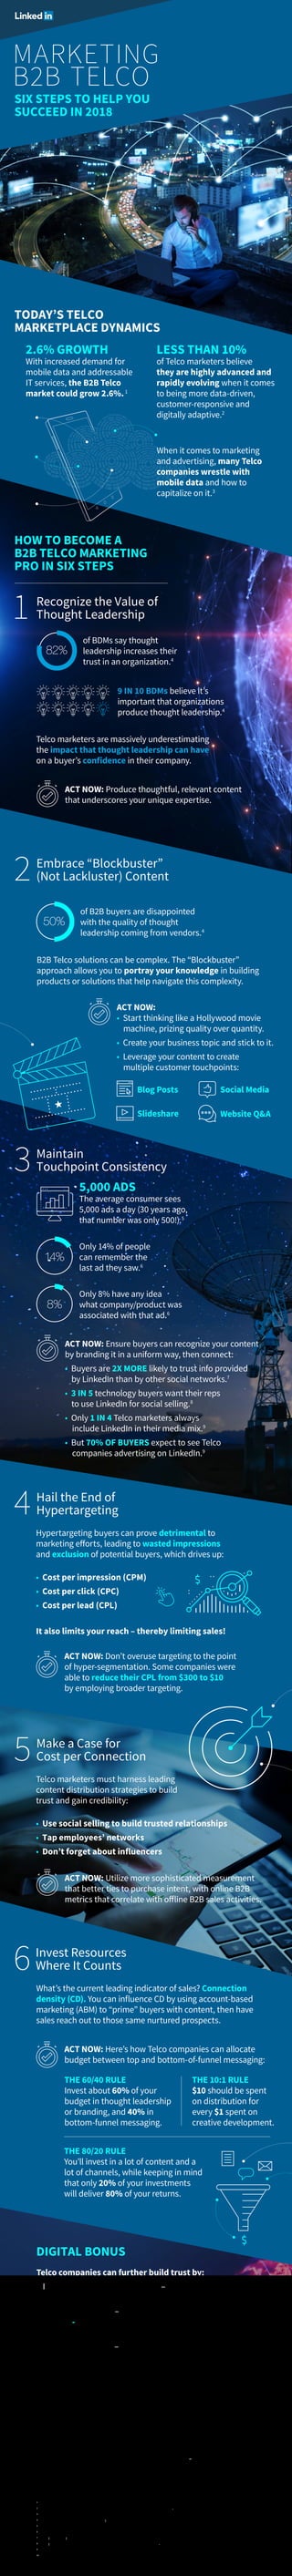 SIX STEPS TO HELP YOU
SUCCEED IN 2018
TODAY’S TELCO
MARKETPLACE DYNAMICS
MARKETING
B2B TELCO
2.6% GROWTH
With increased demand for
mobile data and addressable
IT services, the B2B Telco
market could grow 2.6%.1
LESS THAN 10%
of Telco marketers believe
they are highly advanced and
rapidly evolving when it comes
to being more data-driven,
customer-responsive and
digitally adaptive.2
HOW TO BECOME A
B2B TELCO MARKETING
PRO IN SIX STEPS
Recognize the Value of
Thought Leadership1
9 IN 10 BDMs believe it’s
important that organizations
produce thought leadership.4
82%
of BDMs say thought
leadership increases their
trust in an organization.4
Telco marketers are massively underestimating
the impact that thought leadership can have
on a buyer’s confidence in their company.
ACT NOW: Produce thoughtful, relevant content
that underscores your unique expertise.
Embrace “Blockbuster”
(Not Lackluster) Content2
50%
of B2B buyers are disappointed
with the quality of thought
leadership coming from vendors.4
B2B Telco solutions can be complex. The “Blockbuster”
approach allows you to portray your knowledge in building
products or solutions that help navigate this complexity.
ACT NOW:
• Start thinking like a Hollywood movie
machine, prizing quality over quantity.
• Create your business topic and stick to it.
• Leverage your content to create
multiple customer touchpoints:
Blog Posts
Slideshare
Social Media
Website Q&A
Maintain
Touchpoint Consistency3
Only 14% of people
can remember the
last ad they saw.6
5,000 ADS
The average consumer sees
5,000 ads a day (30 years ago,
that number was only 500!).5
14%
8%
Only 8% have any idea
what company/product was
associated with that ad.6
ACT NOW: Ensure buyers can recognize your content
by branding it in a uniform way, then connect:
• Buyers are 2X MORE likely to trust info provided
by LinkedIn than by other social networks.7
• 3 IN 5 technology buyers want their reps
to use LinkedIn for social selling.8
• Only 1 IN 4 Telco marketers always
include LinkedIn in their media mix.9
• But 70% OF BUYERS expect to see Telco
companies advertising on LinkedIn.9
When it comes to marketing
and advertising, many Telco
companies wrestle with
mobile data and how to
capitalize on it.3
Hail the End of
Hypertargeting4
Hypertargeting buyers can prove detrimental to
marketing efforts, leading to wasted impressions
and exclusion of potential buyers, which drives up:
• Cost per impression (CPM)
• Cost per click (CPC)
• Cost per lead (CPL)
It also limits your reach – thereby limiting sales!
ACT NOW: Don’t overuse targeting to the point
of hyper-segmentation. Some companies were
able to reduce their CPL from $300 to $10
by employing broader targeting.
Make a Case for
Cost per Connection5
Telco marketers must harness leading
content distribution strategies to build
trust and gain credibility:
• Use social selling to build trusted relationships
• Tap employees’ networks
• Don’t forget about influencers
ACT NOW: Utilize more sophisticated measurement
that better ties to purchase intent, with online B2B
metrics that correlate with offline B2B sales activities.
Invest Resources
Where It Counts6
What’s the current leading indicator of sales? Connection
density (CD). You can influence CD by using account-based
marketing (ABM) to “prime” buyers with content, then have
sales reach out to those same nurtured prospects.
ACT NOW: Here’s how Telco companies can allocate
budget between top and bottom-of-funnel messaging:
THE 60/40 RULE
Invest about 60% of your
budget in thought leadership
or branding, and 40% in
bottom-funnel messaging.
THE 10:1 RULE
$10 should be spent
on distribution for
every $1 spent on
creative development.
THE 80/20 RULE
You’ll invest in a lot of content and a
lot of channels, while keeping in mind
that only 20% of your investments
will deliver 80% of your returns.
DIGITAL BONUS
Telco companies can further build trust by:
• Investing in omnichannel sales – expand
digital sales to increase revenue by 30%.10
• Leaning into digital – be ready to
use 360-degree data on individual
customers to help personalize.10
• Dive into analytics – reduce customer
churn and optimize network design.10
Get Started Now
To stay ahead of the curve, Telco B2B marketers must form
deeper connections with current and potential customers to
establish a base of trust and take advantage of the digital
evolution for years to come. For a more in-depth look at these
Telco B2B marketing insights and how to put them into action
at your organization, read our latest eBook.
Sources:
1
bain.com, “How to Capture the B2B Growth Opportunity in Telecom,” April 2016
2
cmocouncil.org, “CMO Council Predicts Brand and Telco Partnering Will Drive Omni-Channel Marketing Effectiveness Globally,” August 2017
3
emarketer.com, “For Telecoms, the Ad Tech Opportunity is Massive,” January 2017
4
edelman.com, “How Thought Leadership Impacts B2B Demand Generation,” 2017
5
sjinsights.net, “New Research Sheds Light on Daily Ad Exposures,” September 2014
6
mediapost.com, “Banner Blindness: 60% Can’t Remember the Last Display Ad They Saw,” March 2013
7
LinkedIn, “LinkedIn Professional Consumer Survey,” 2014
8
LinkedIn, “The Future Tech Buying Committee: Millennials + Gen X Decision-Makers Achieving MORE, Together,” 2017
9
ResearchNow
10
mckinsey.com, “How Telecom Companies Can Win in the Digital Revolution,” October 2016
 